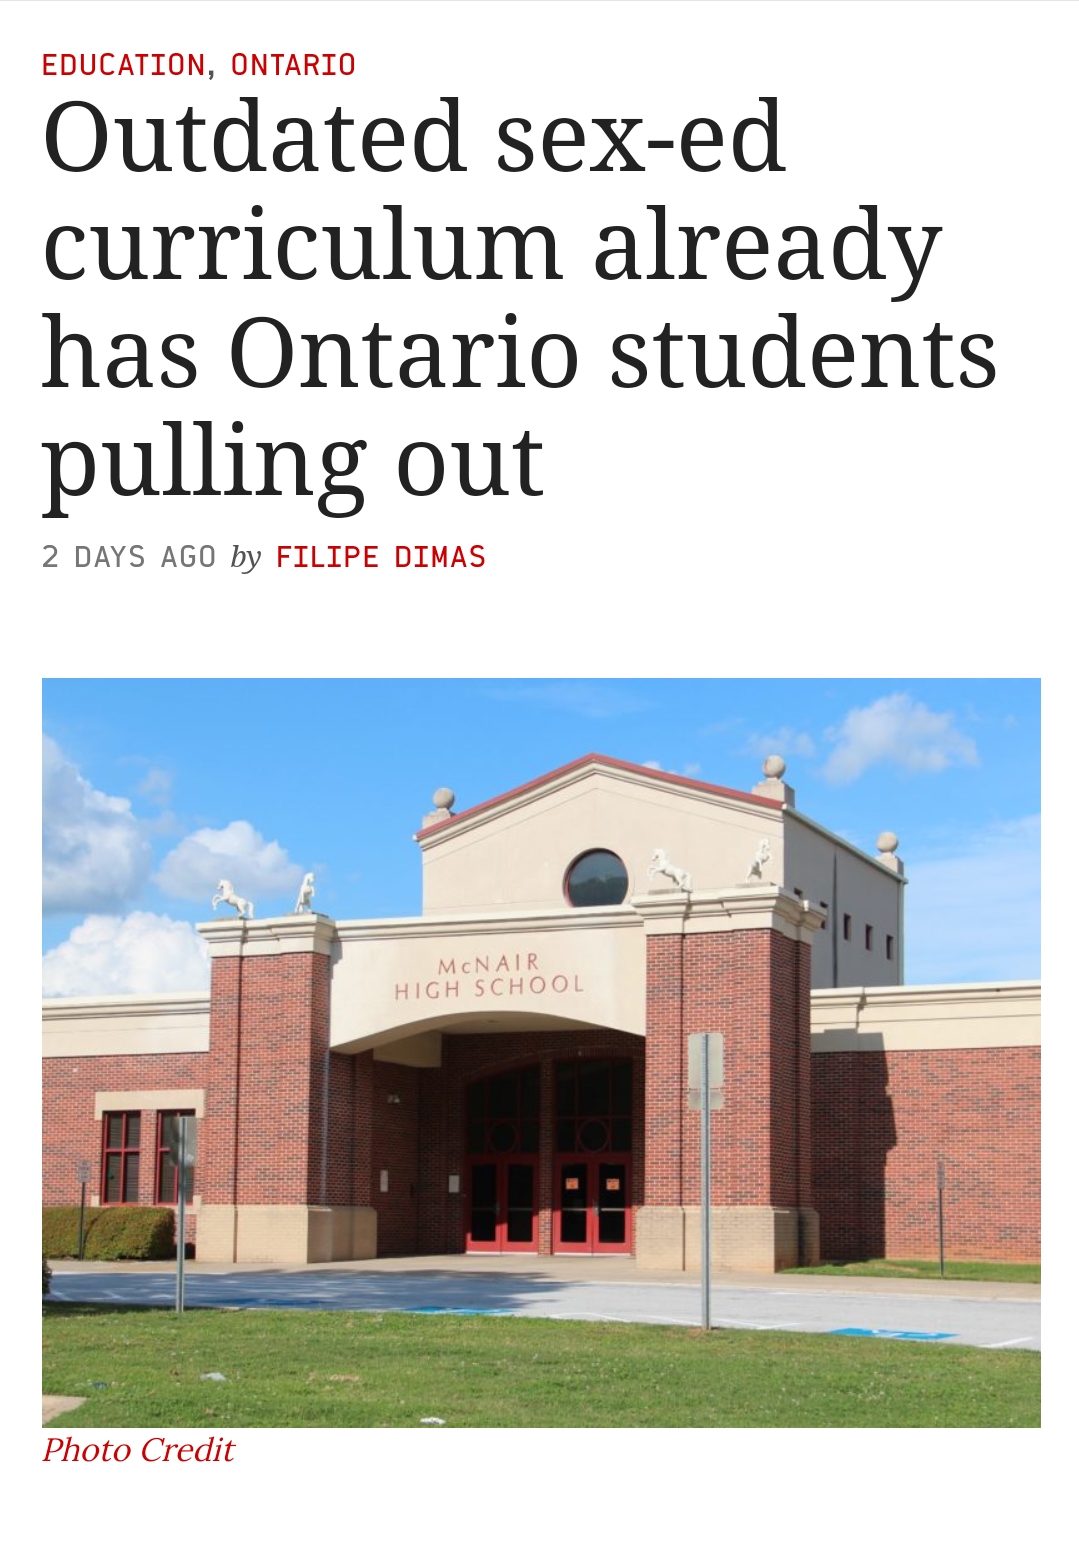 mcnair high school ga - Education, Ontario Outdated sexed curriculum already has Ontario students pulling out 2 Days Ago by Filipe Dinas Photo Credit